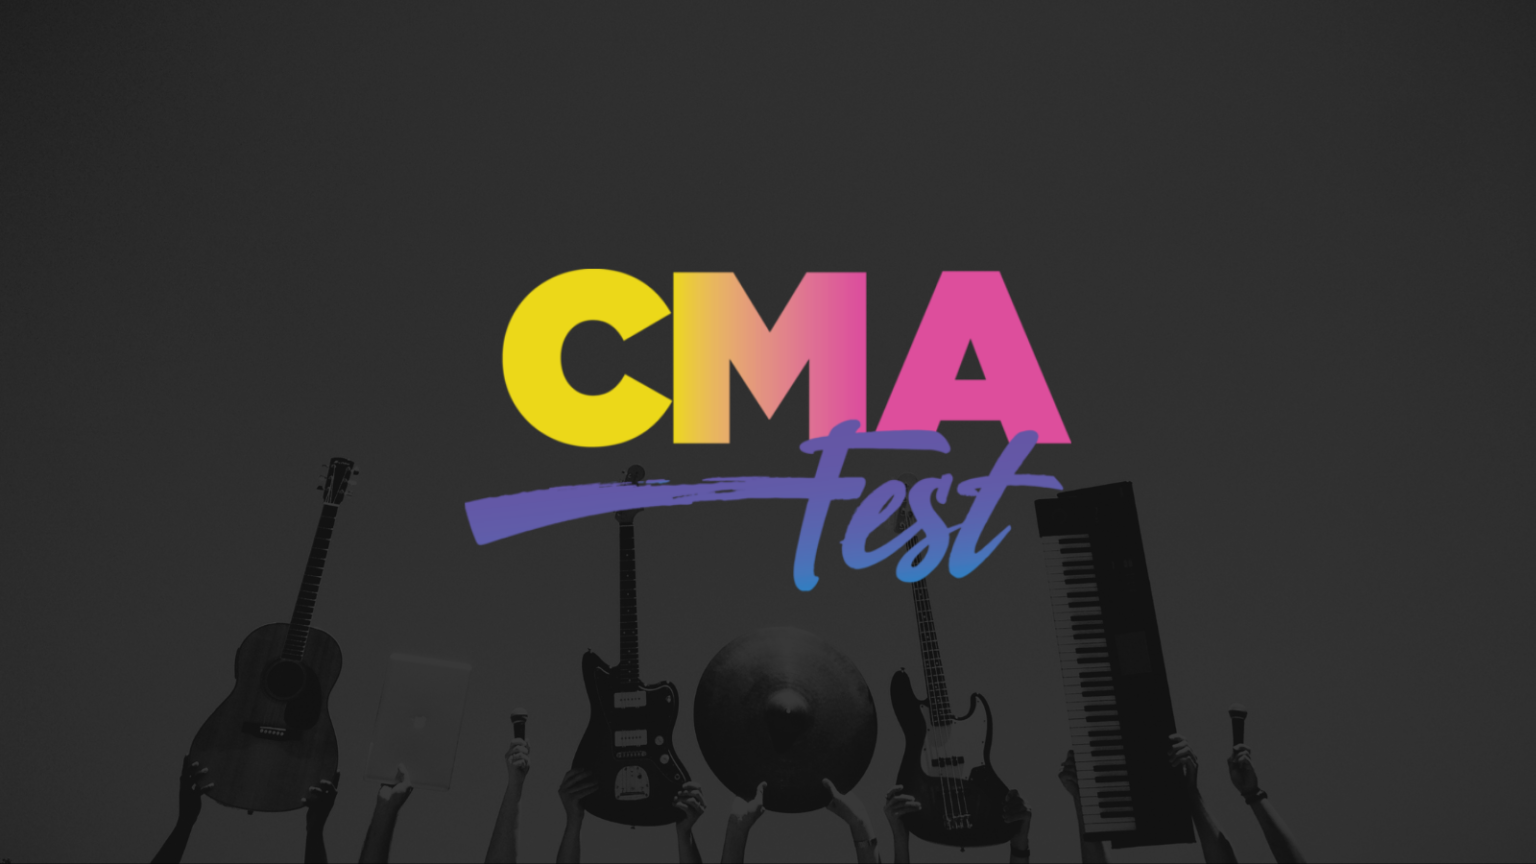 How to Watch 'The CMA Fest' Online: Live Stream From Anywhere